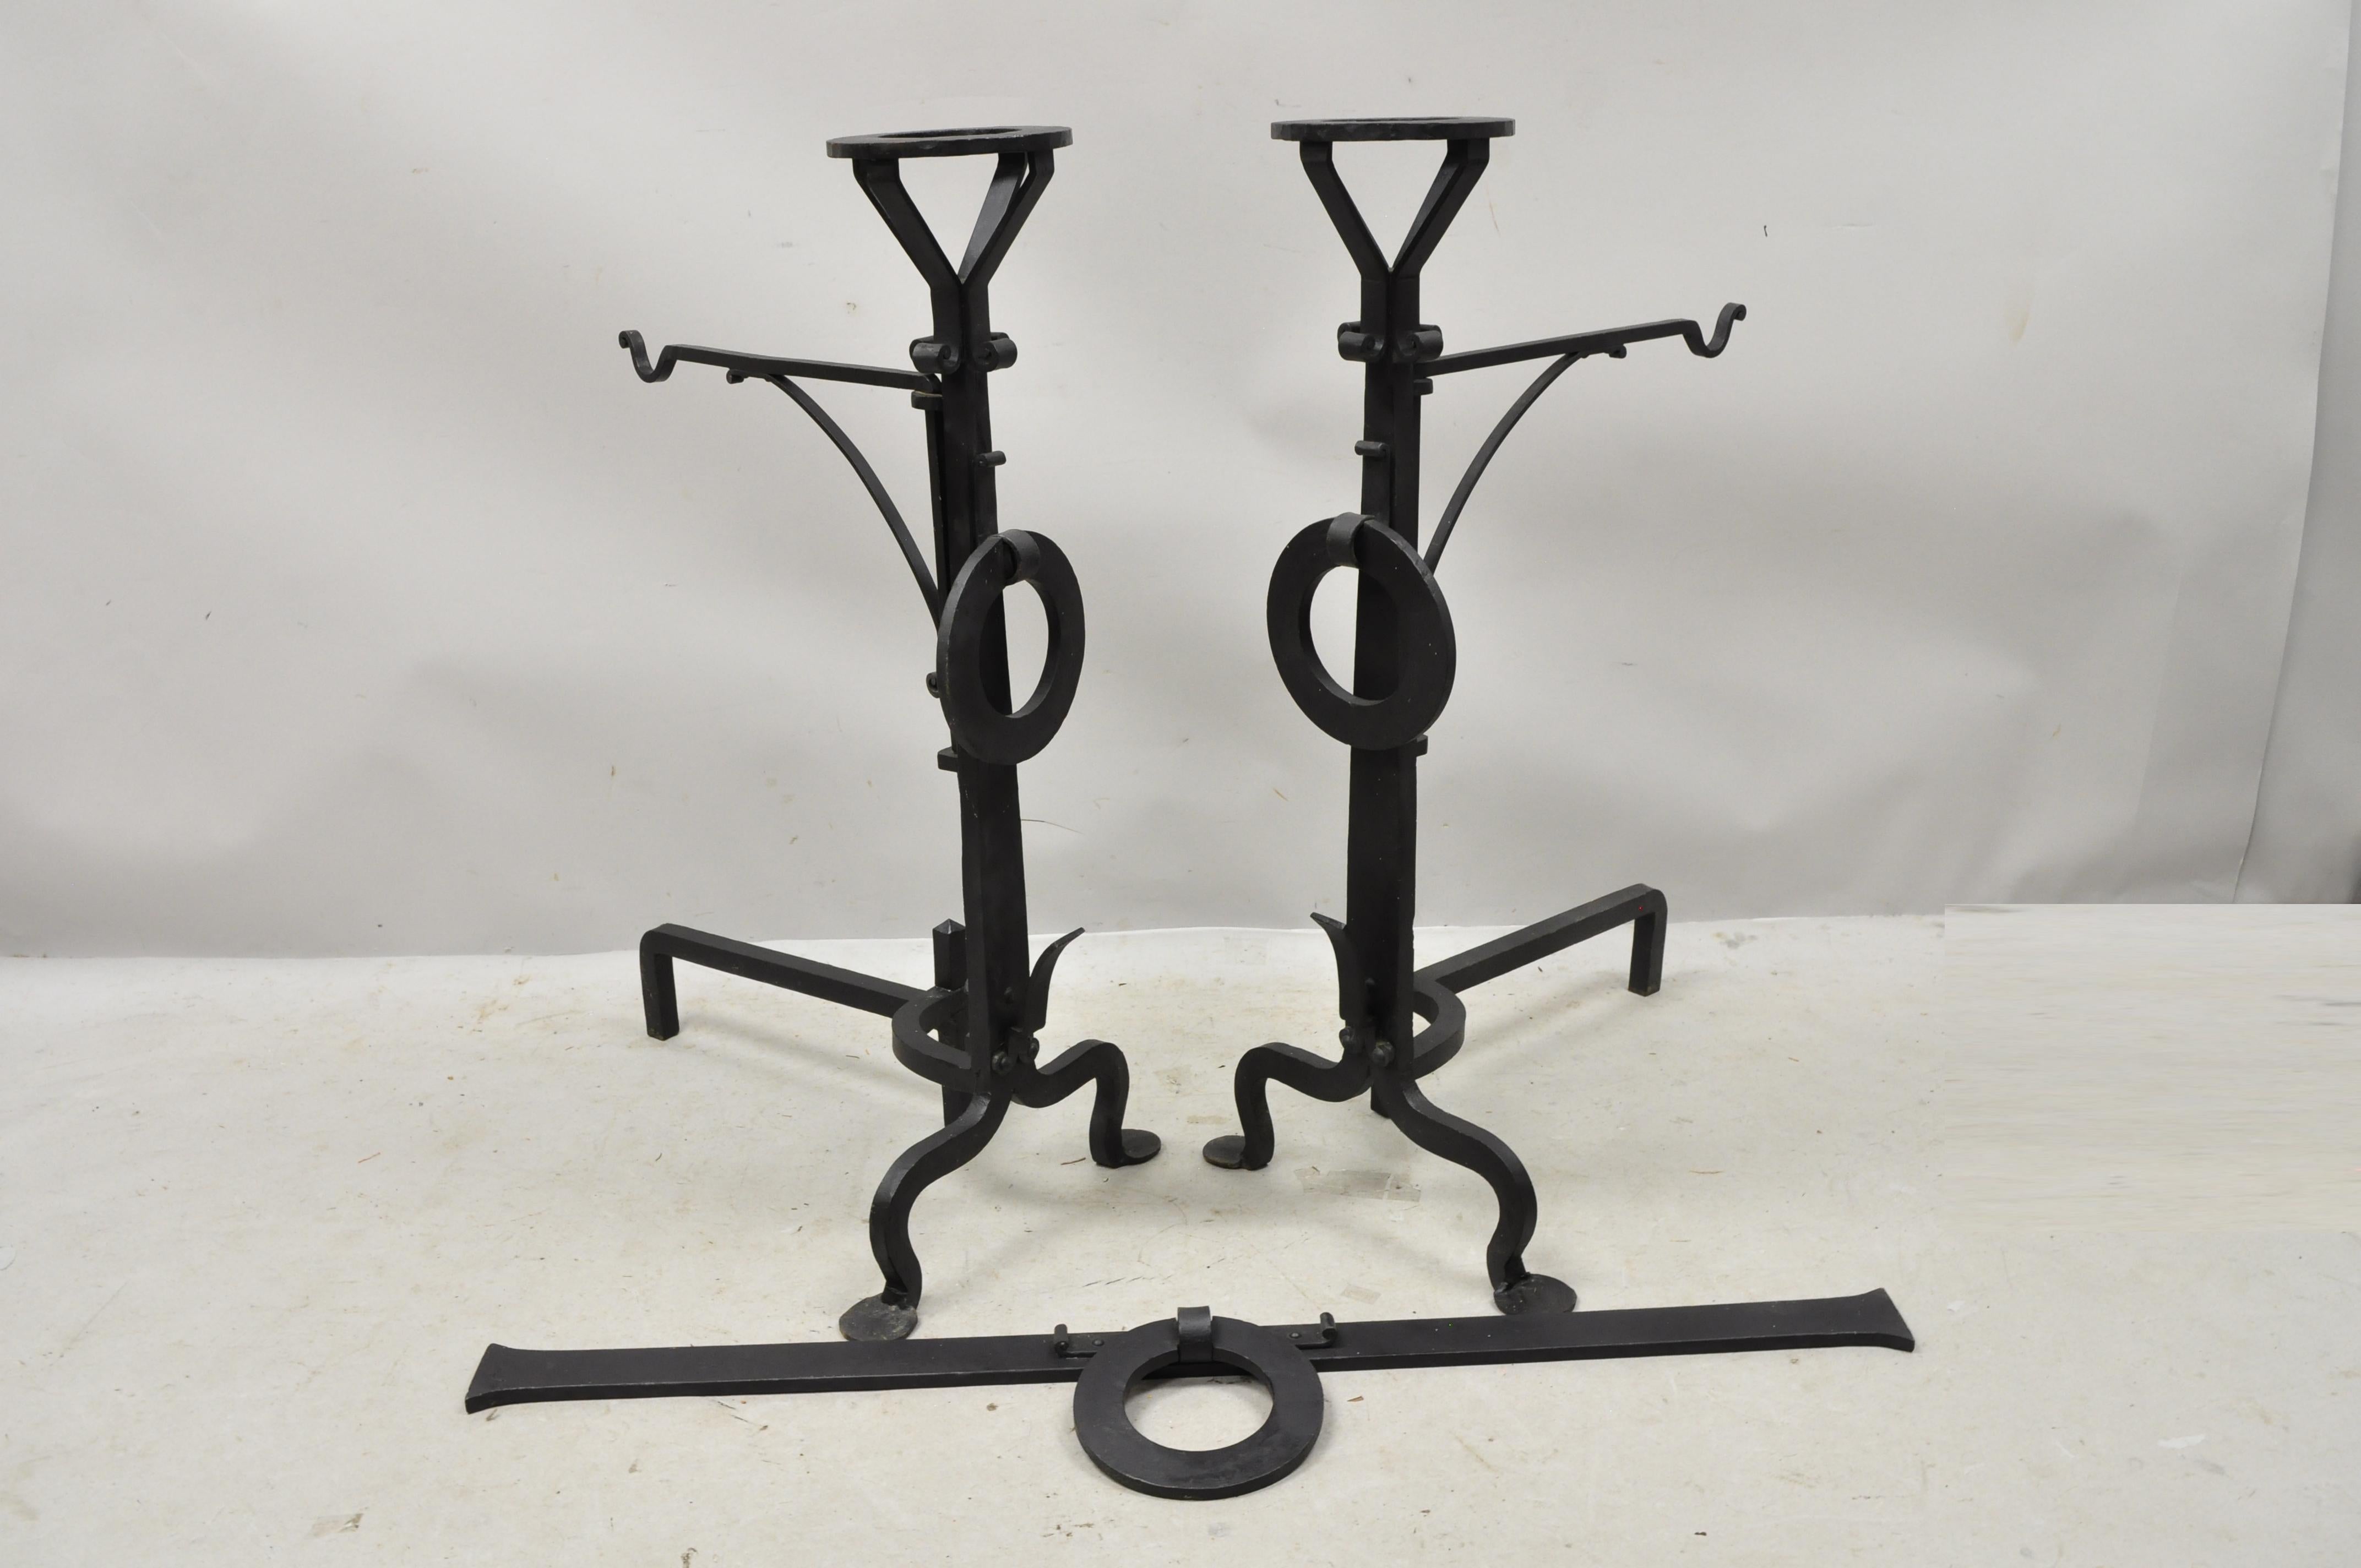 Antique Mission Arts & Crafts wrought cast iron long fireplace andirons and base - 3pc set. Item features 2 swing arms for pots, large iron drop rings, hand forged details, removable bar with ring, wrought iron construction, very nice antique item,